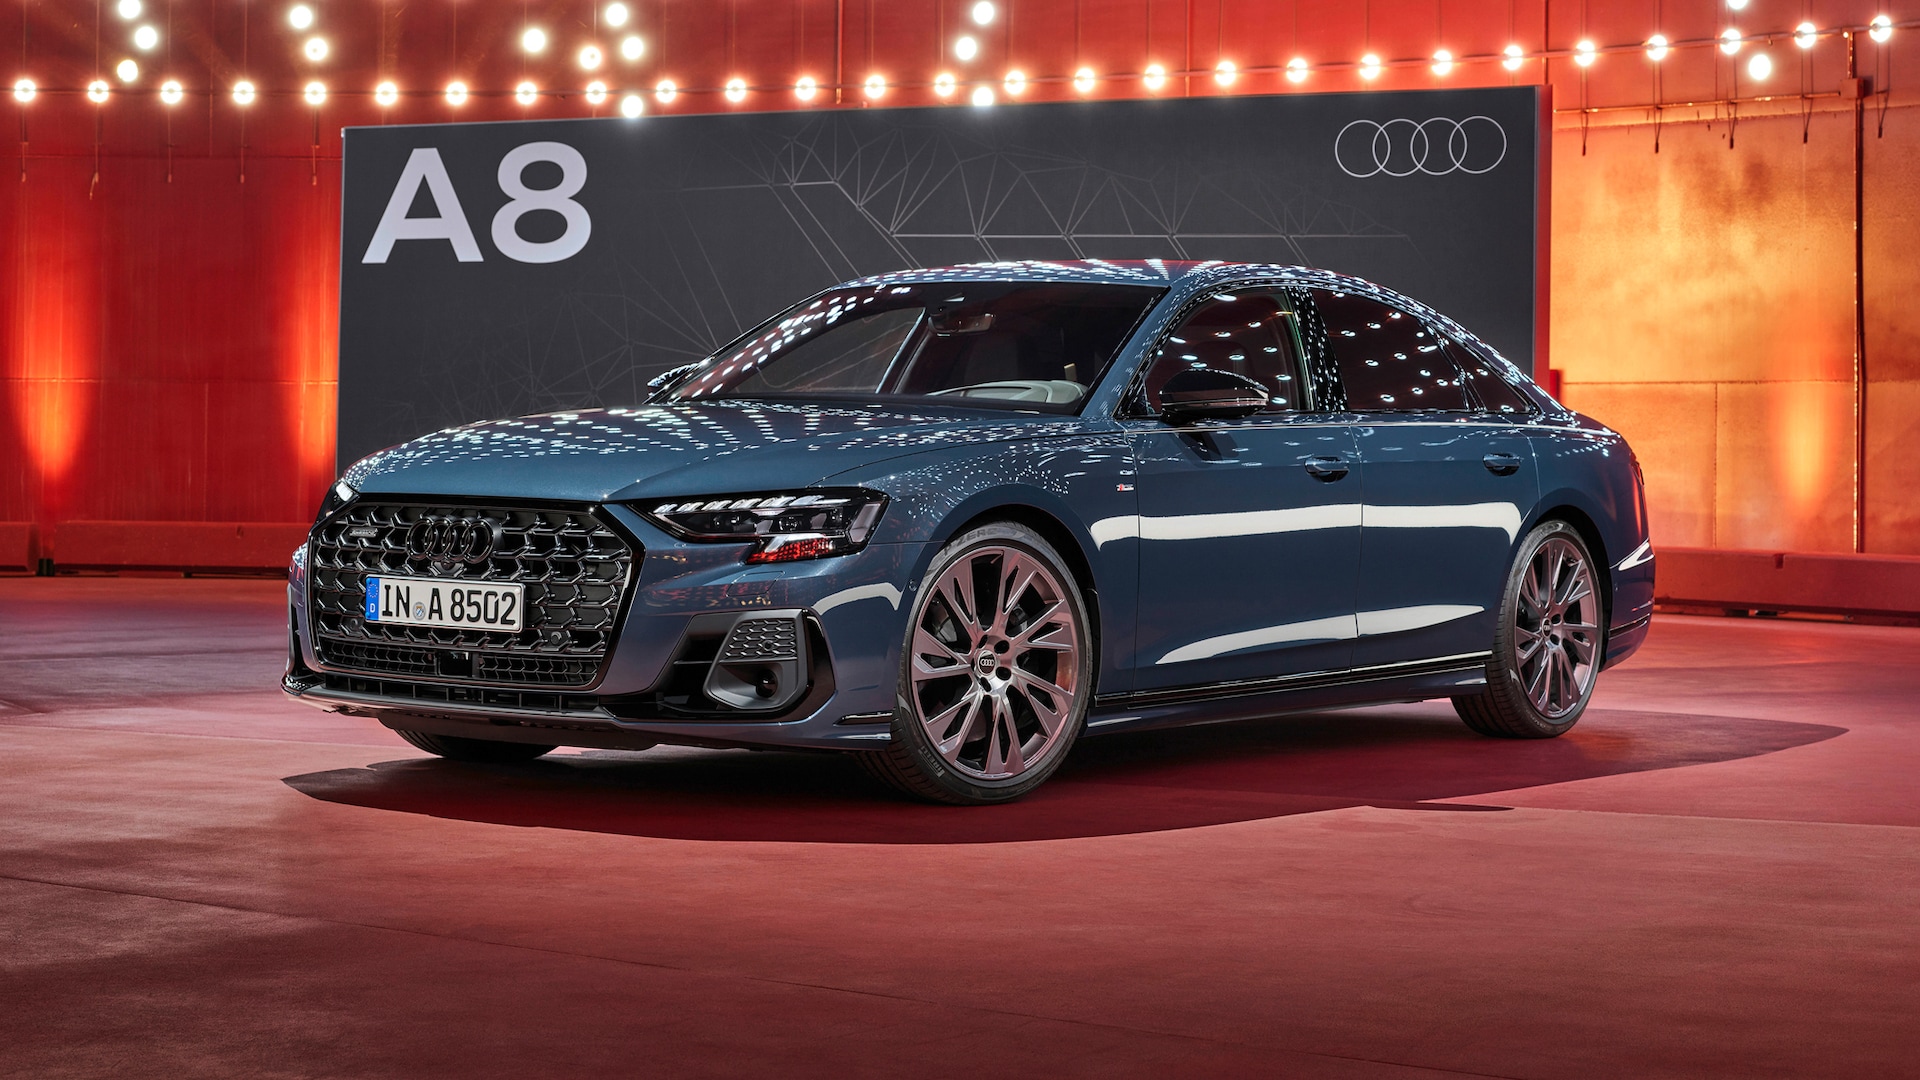 2022 Audi A8 Prices, Reviews, and Photos - MotorTrend